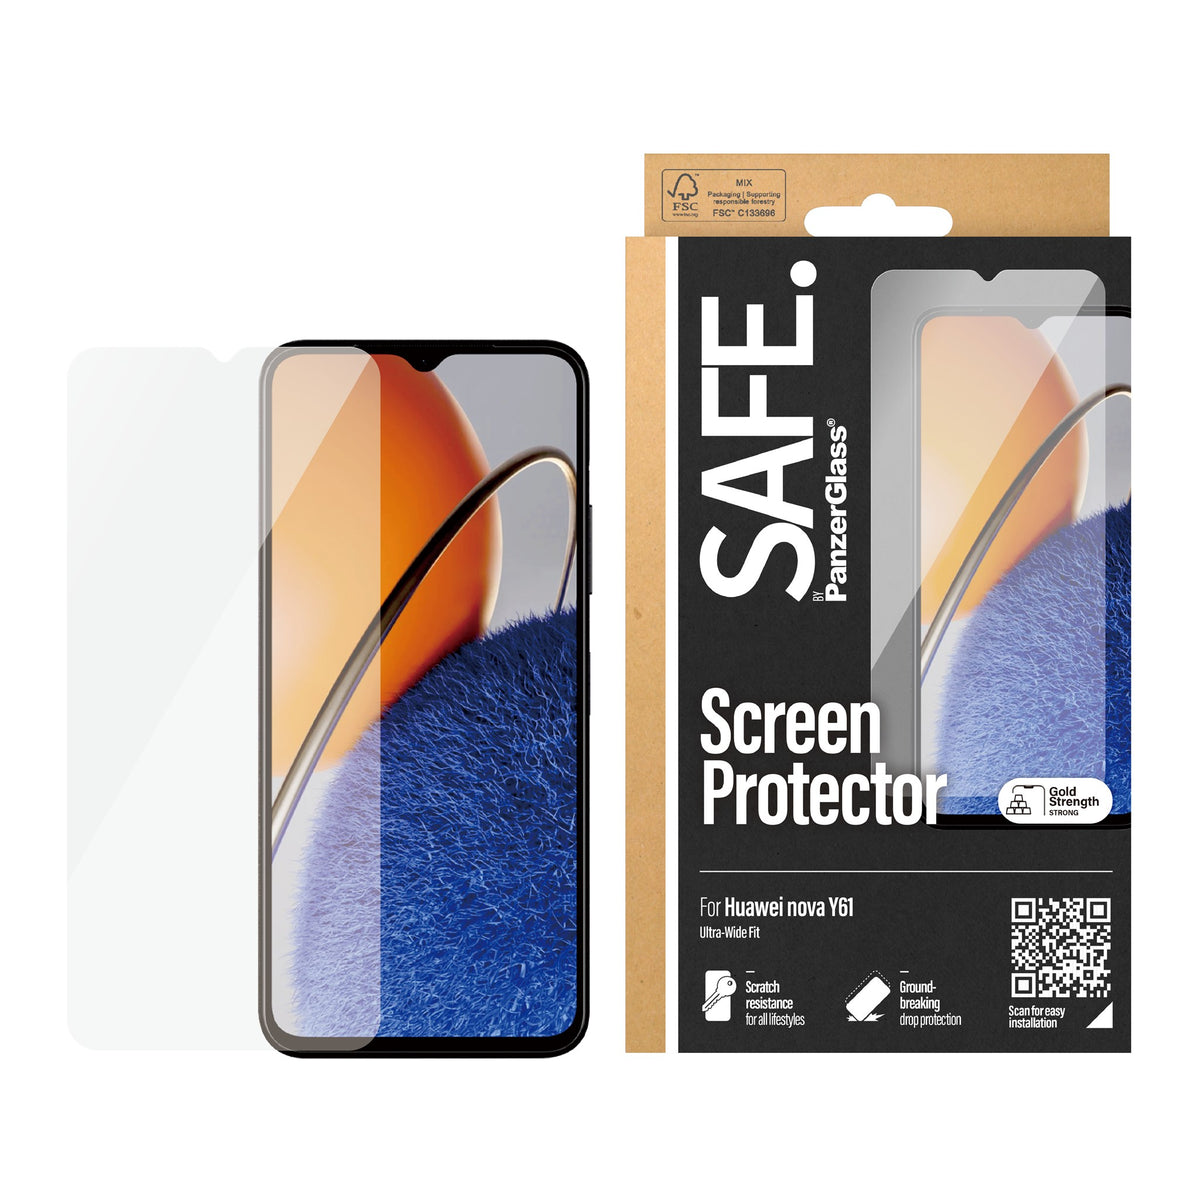 SAFE. by PanzerGlass® Screen Protector Huawei Nova Y61 | Ultra-Wide Fit 2